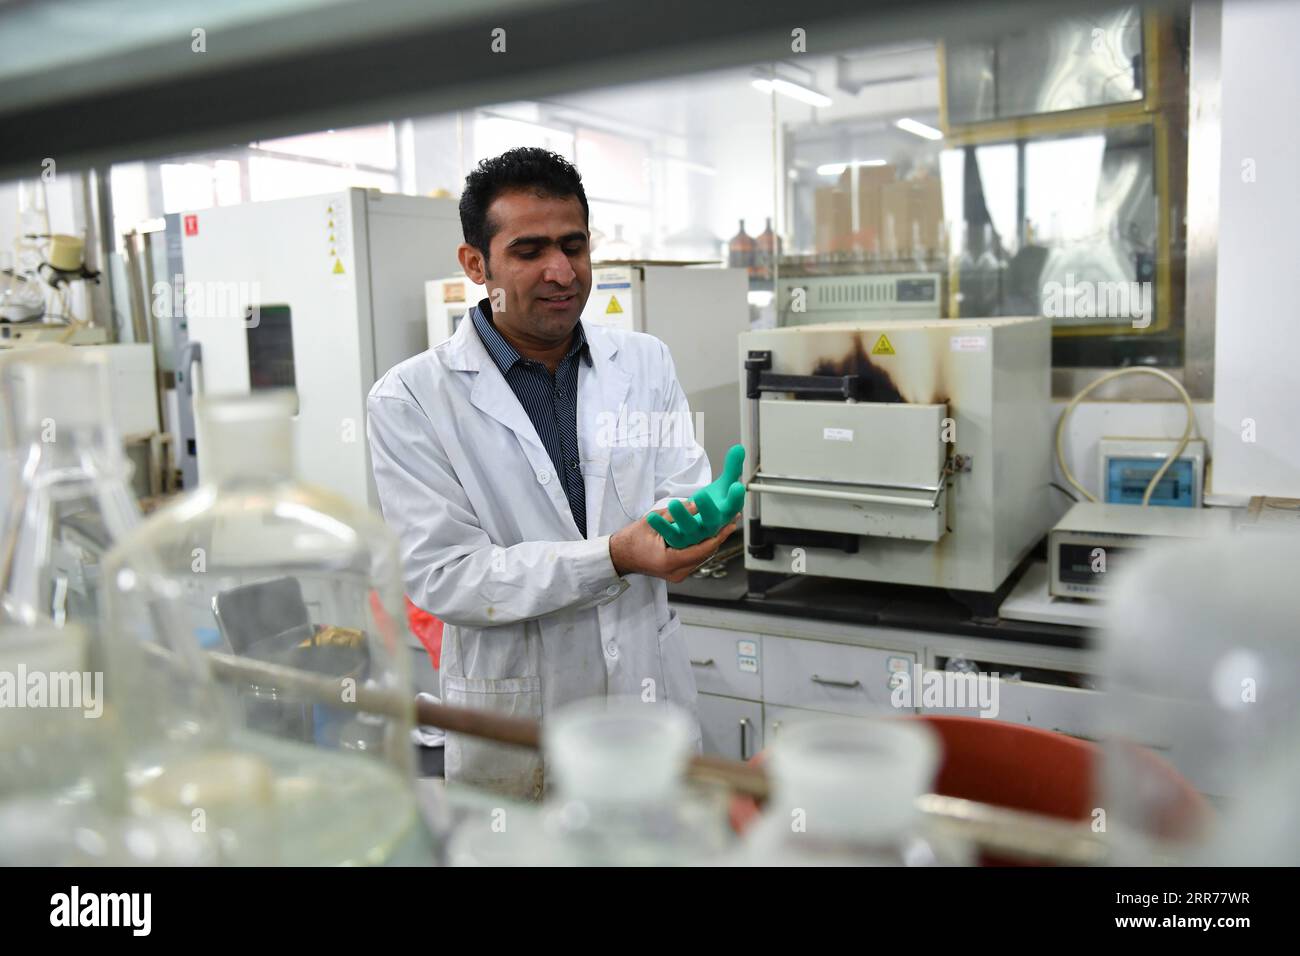 210318 -- XI AN, March 18, 2021 -- Abdul Ghaffar Shar makes preparation for an experiment at a laboratory of Northwest Agriculture and Forestry University NWAFU in Yangling, northwest China s Shaanxi Province, March 17, 2021. Abdul Ghaffar Shar, 30, is a Pakistani doctoral student in China s Northwest Agriculture and Forestry University NWAFU. Shar is doing plant nutrition research for his doctoral degree. After receiving his bachelor s degree in agriculture from Sindh Agriculture University in Pakistan in 2014, Shar decided to further his studies in China s NWAFU. Shar has learned to speak Ma Stock Photo